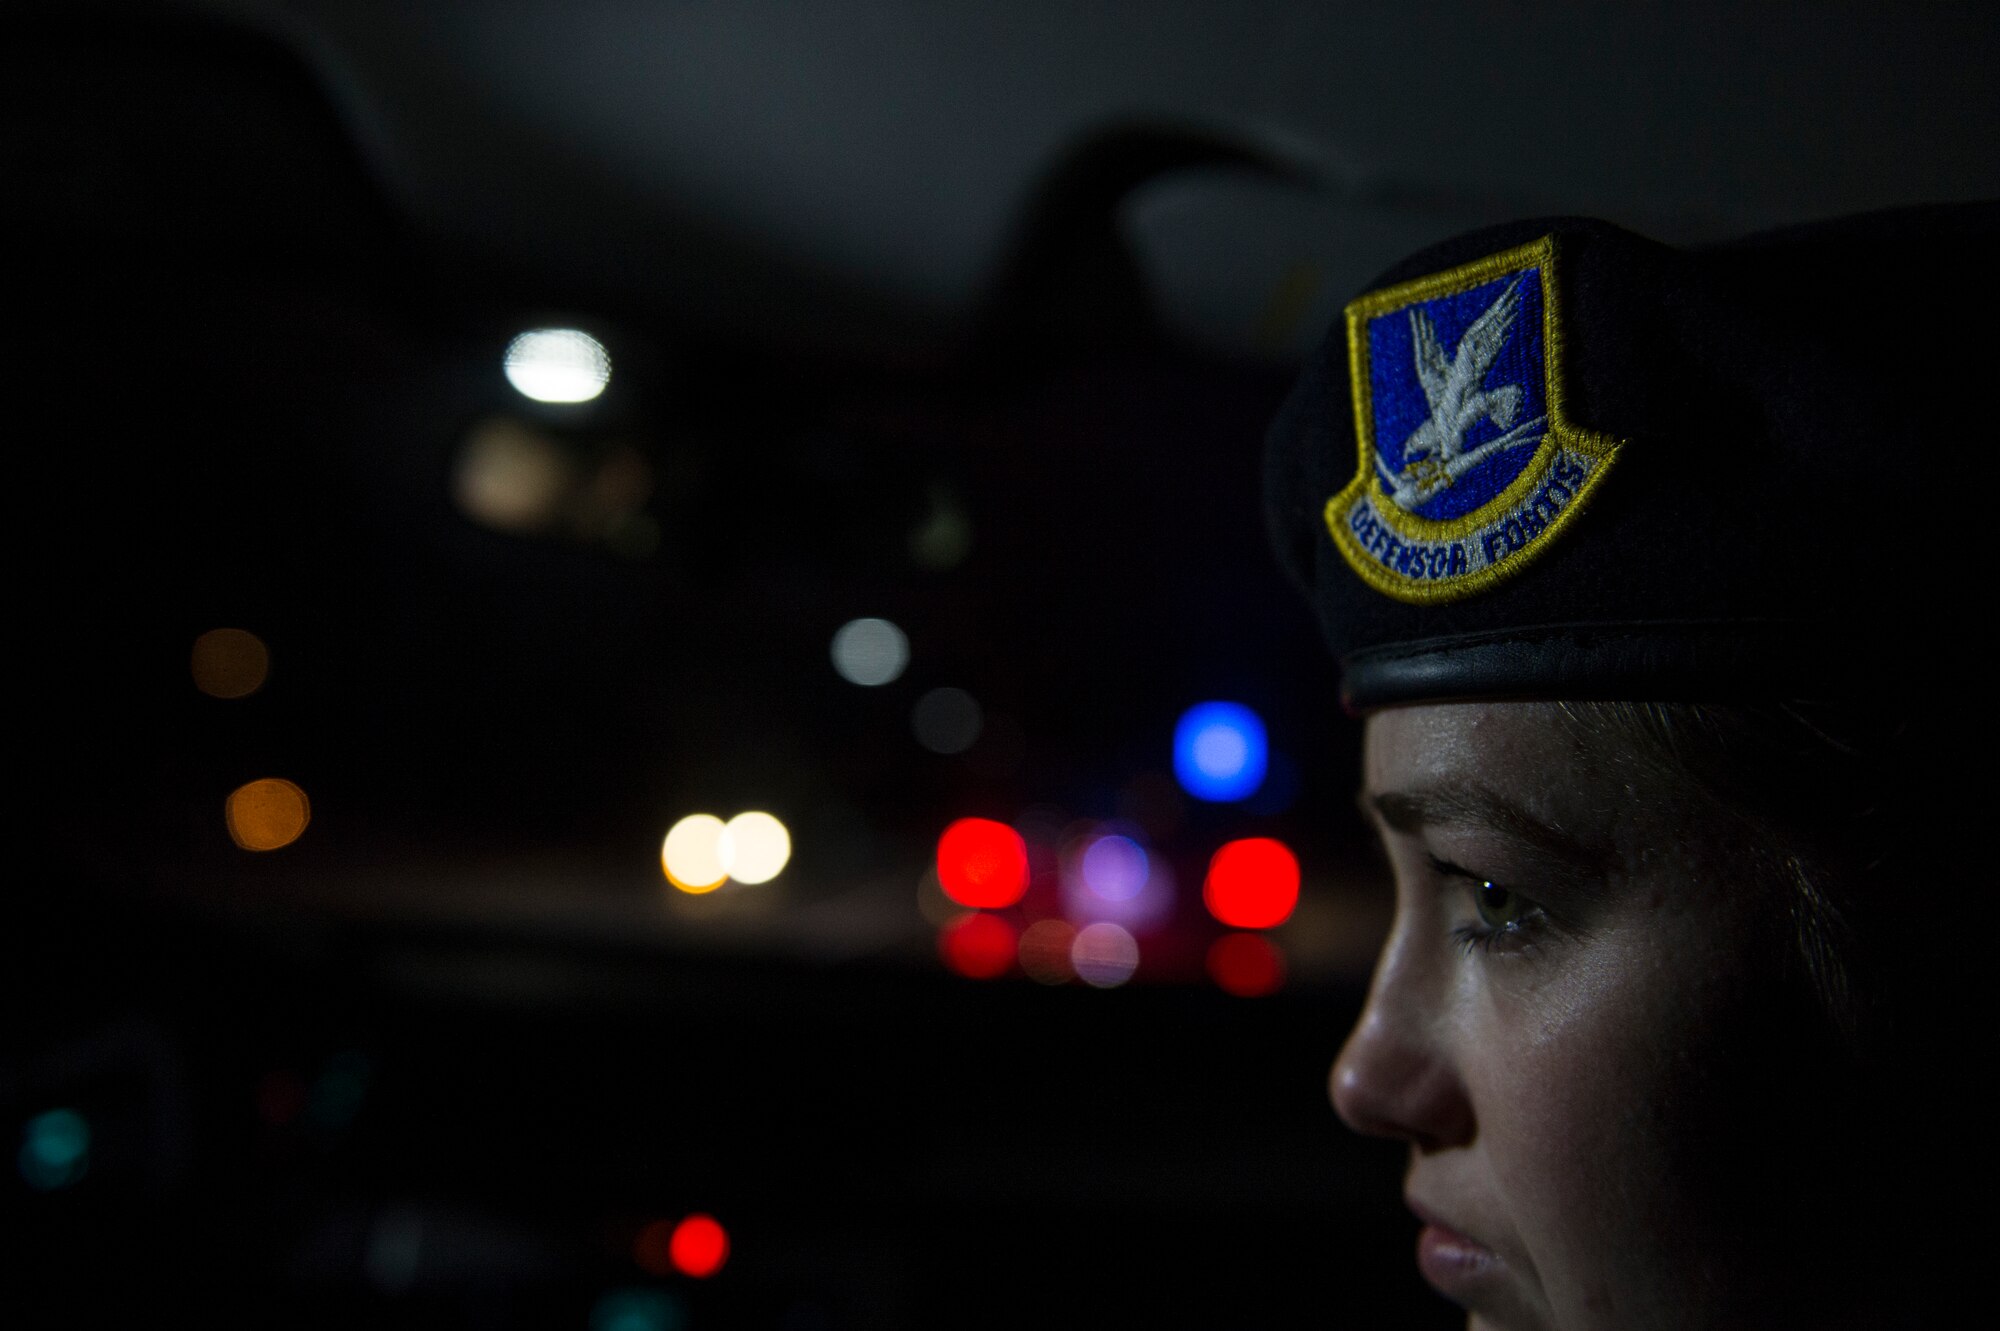 Airman 1st Class Kaitlyn Evans receives on-the-job training from Senior Airman Daniel Hayes as she prepares to approach a vehicle during a routine traffic violation while on night-shift duty at Joint Base Andrews, Maryland. During the evening hours, her role as a patrolman is to secure the base and maintain the safety of personnel. Evans and Hayes are patrolmen assigned to the 11th Security Forces Squadron at Andrews Air Force Base, Maryland. (U.S. Air Force photo/Staff Sgt. Vernon Young Jr.)